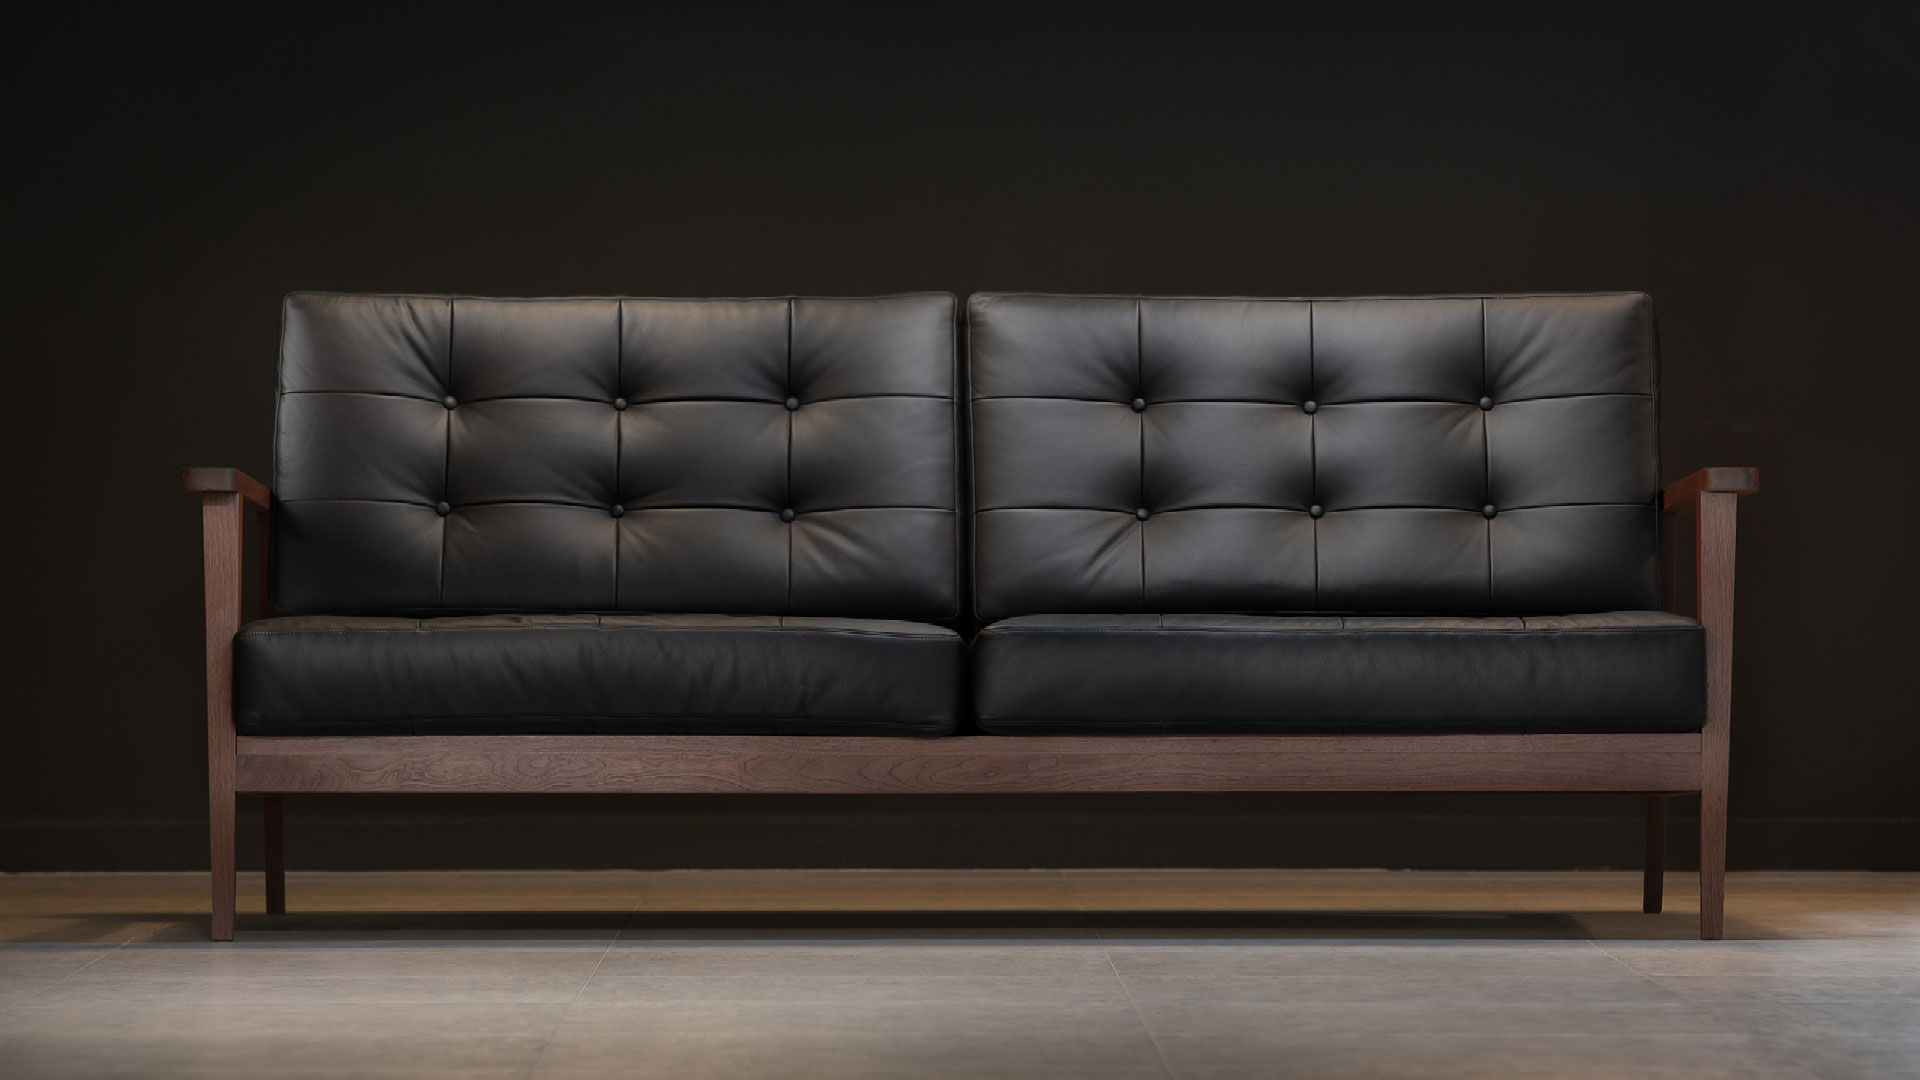 The Mid Century Show Wood Sofa Black, Leather And Wood Sofa Bed